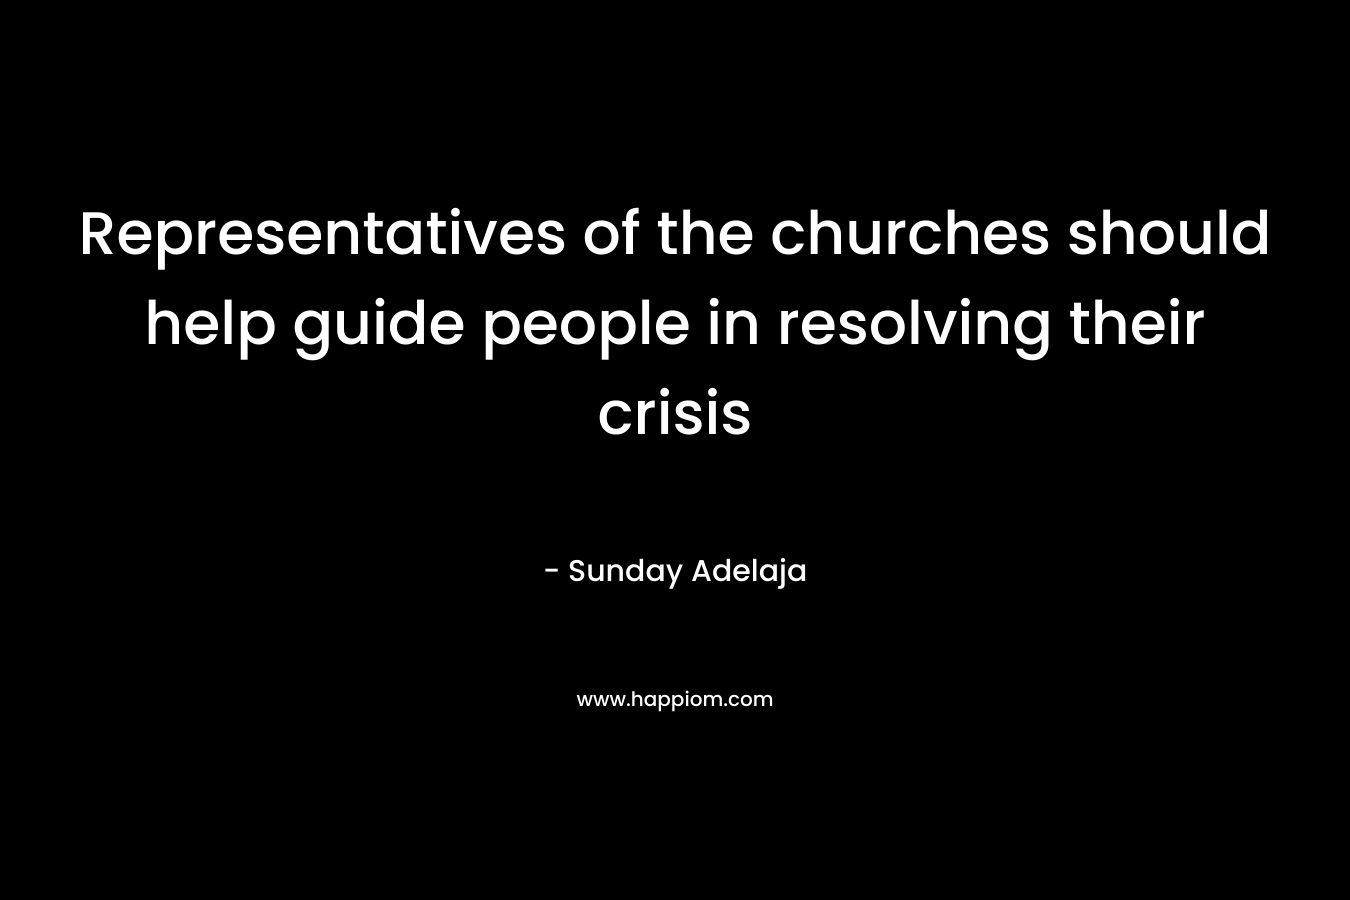 Representatives of the churches should help guide people in resolving their crisis